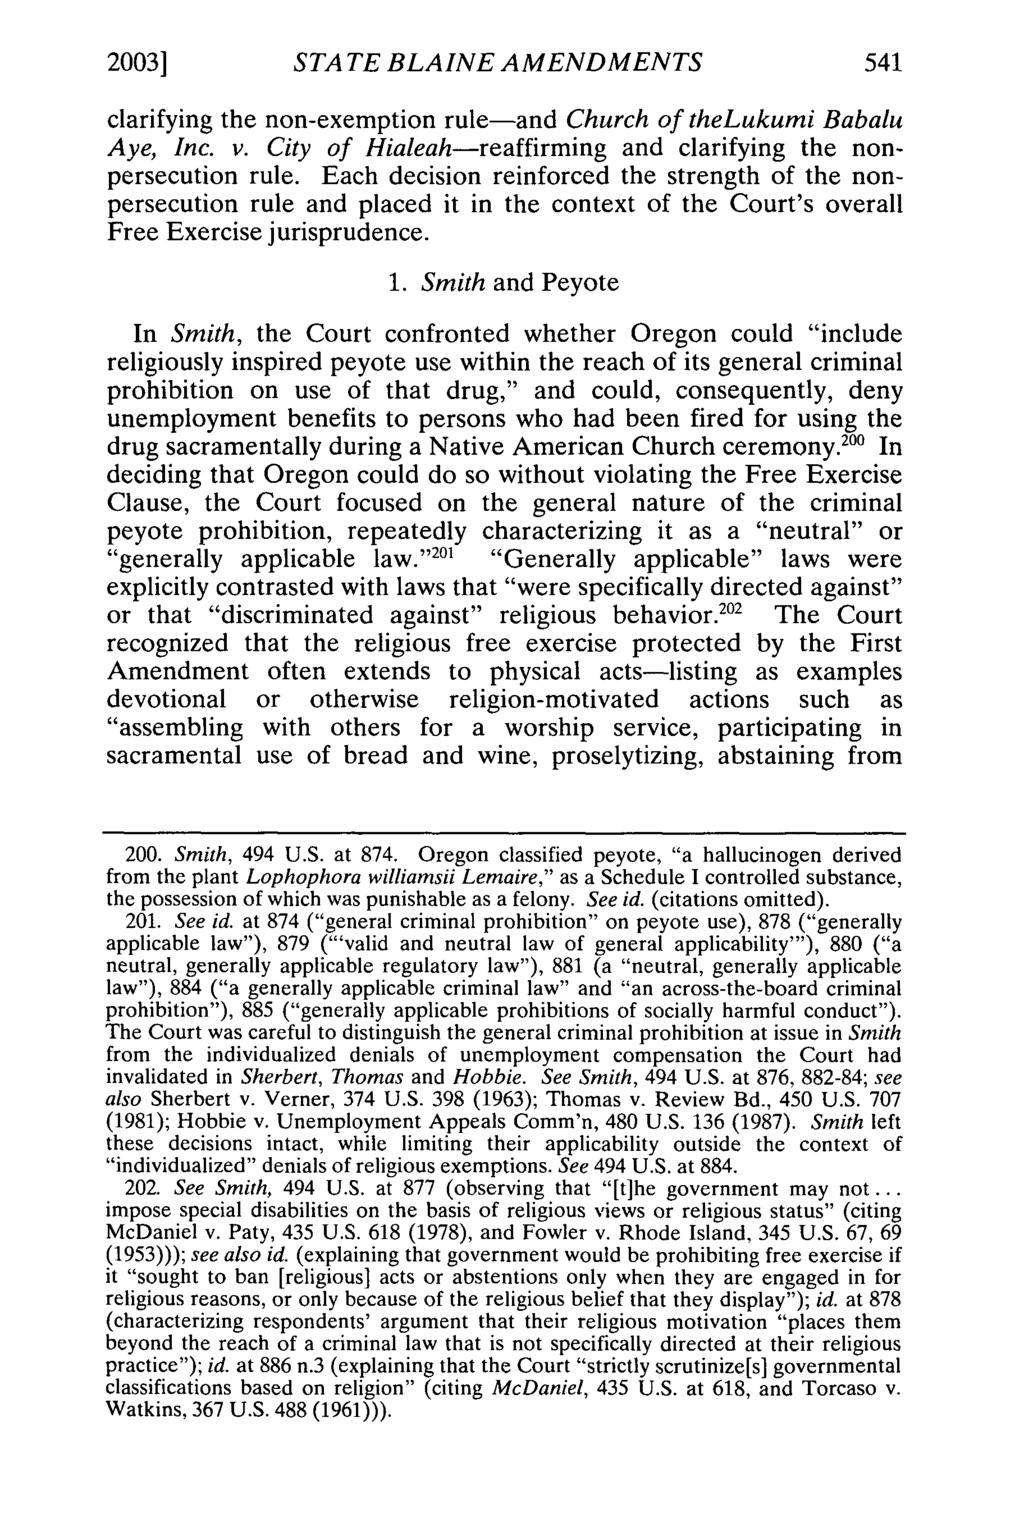 2003] STATE BLAINE AMENDMENTS clarifying the non-exemption rule-and Church of thelukumi Babalu Aye, Inc. v. City of Hialeah-reaffirming and clarifying the nonpersecution rule.